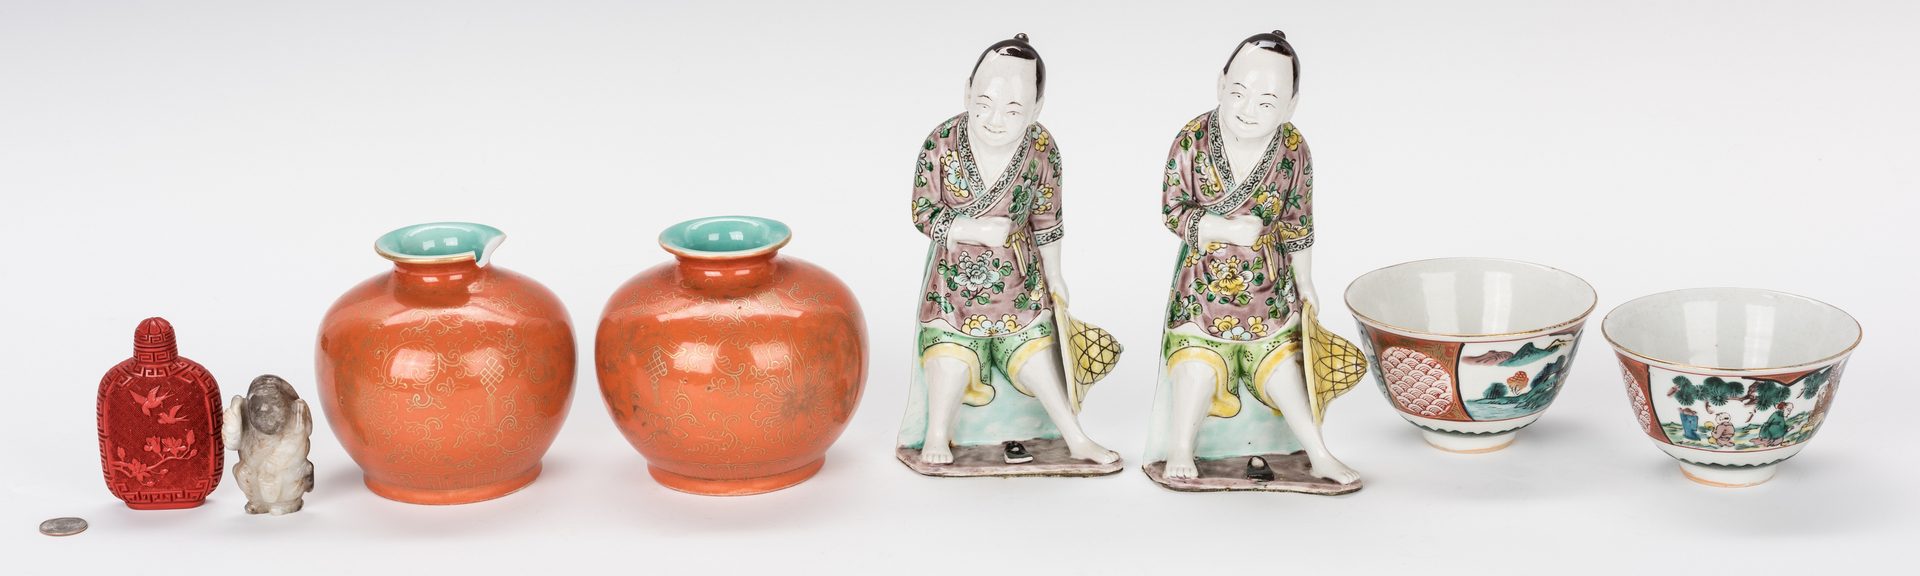 Lot 755: Group of 8 Asian Decorative Items